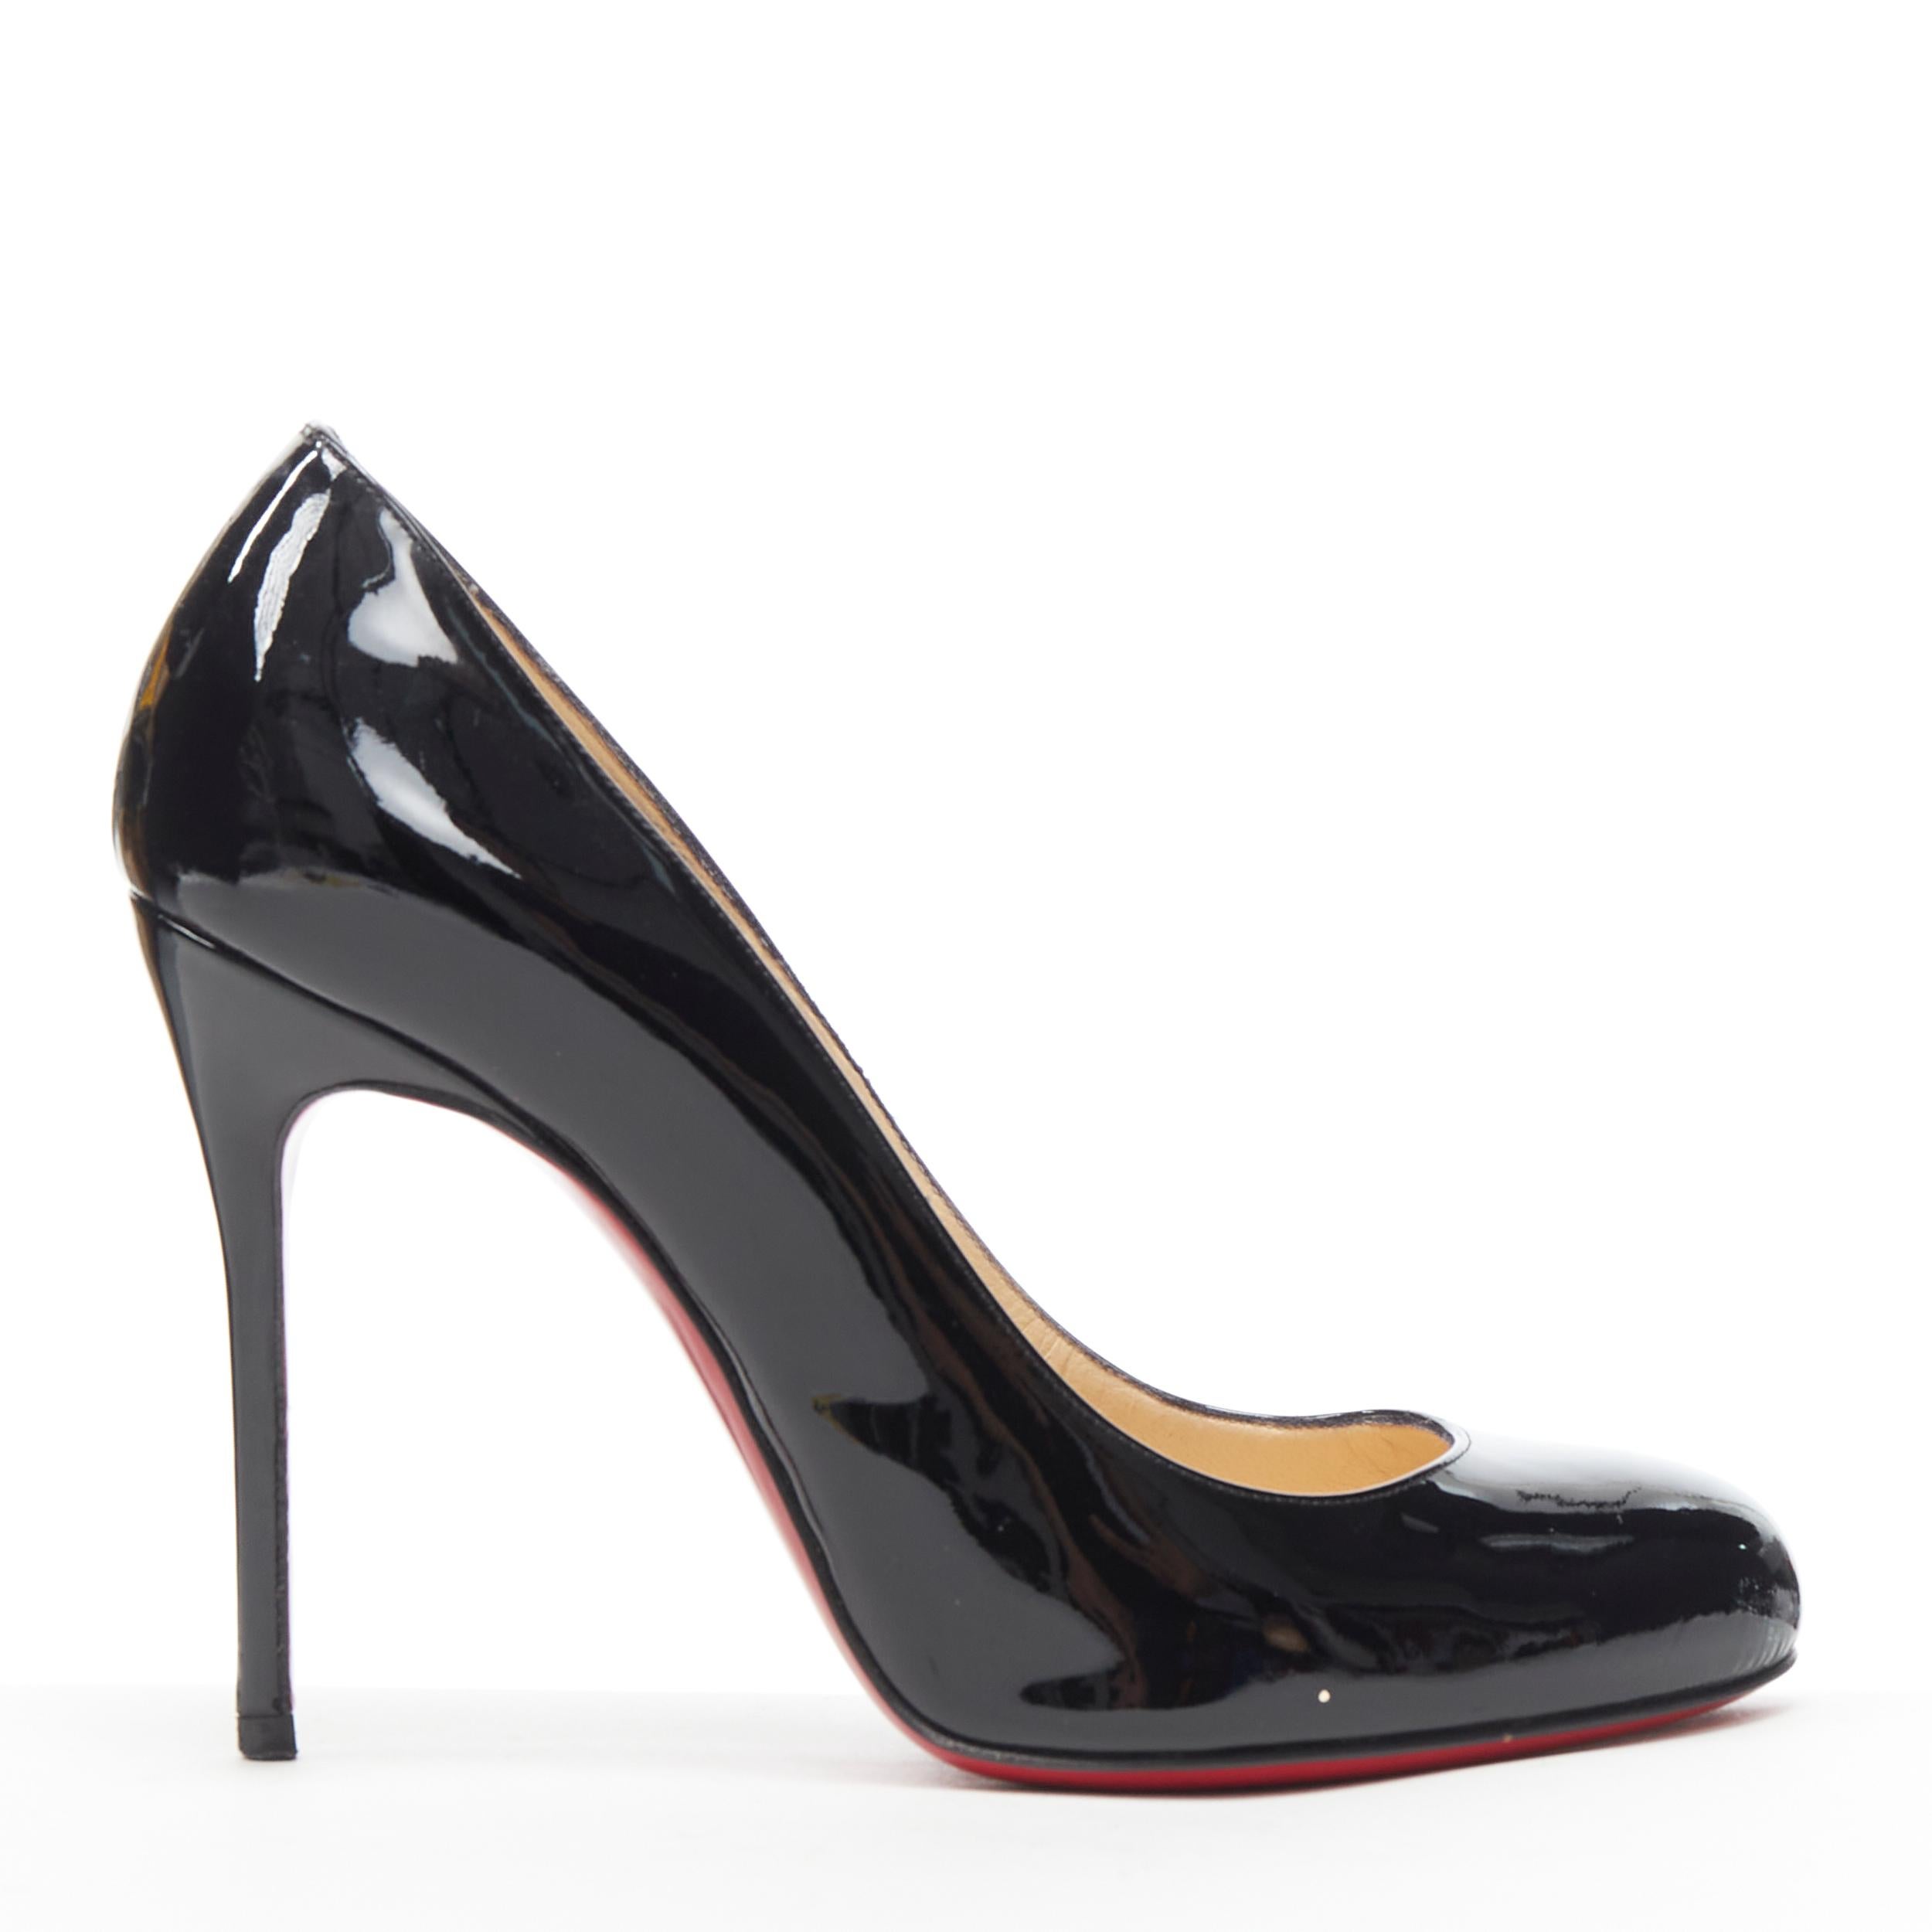 CHRISTIAN LOUBOUTIN Fifille 100 black patent round toe stiletto pump EU36.5 
Reference: TGAS/B00137 
Brand: Christian Louboutin 
Model: Fifille 100 
Material: Patent leather 
Color: Black 
Pattern: Solid 
Extra Detail: Filfille 100. Round toe.